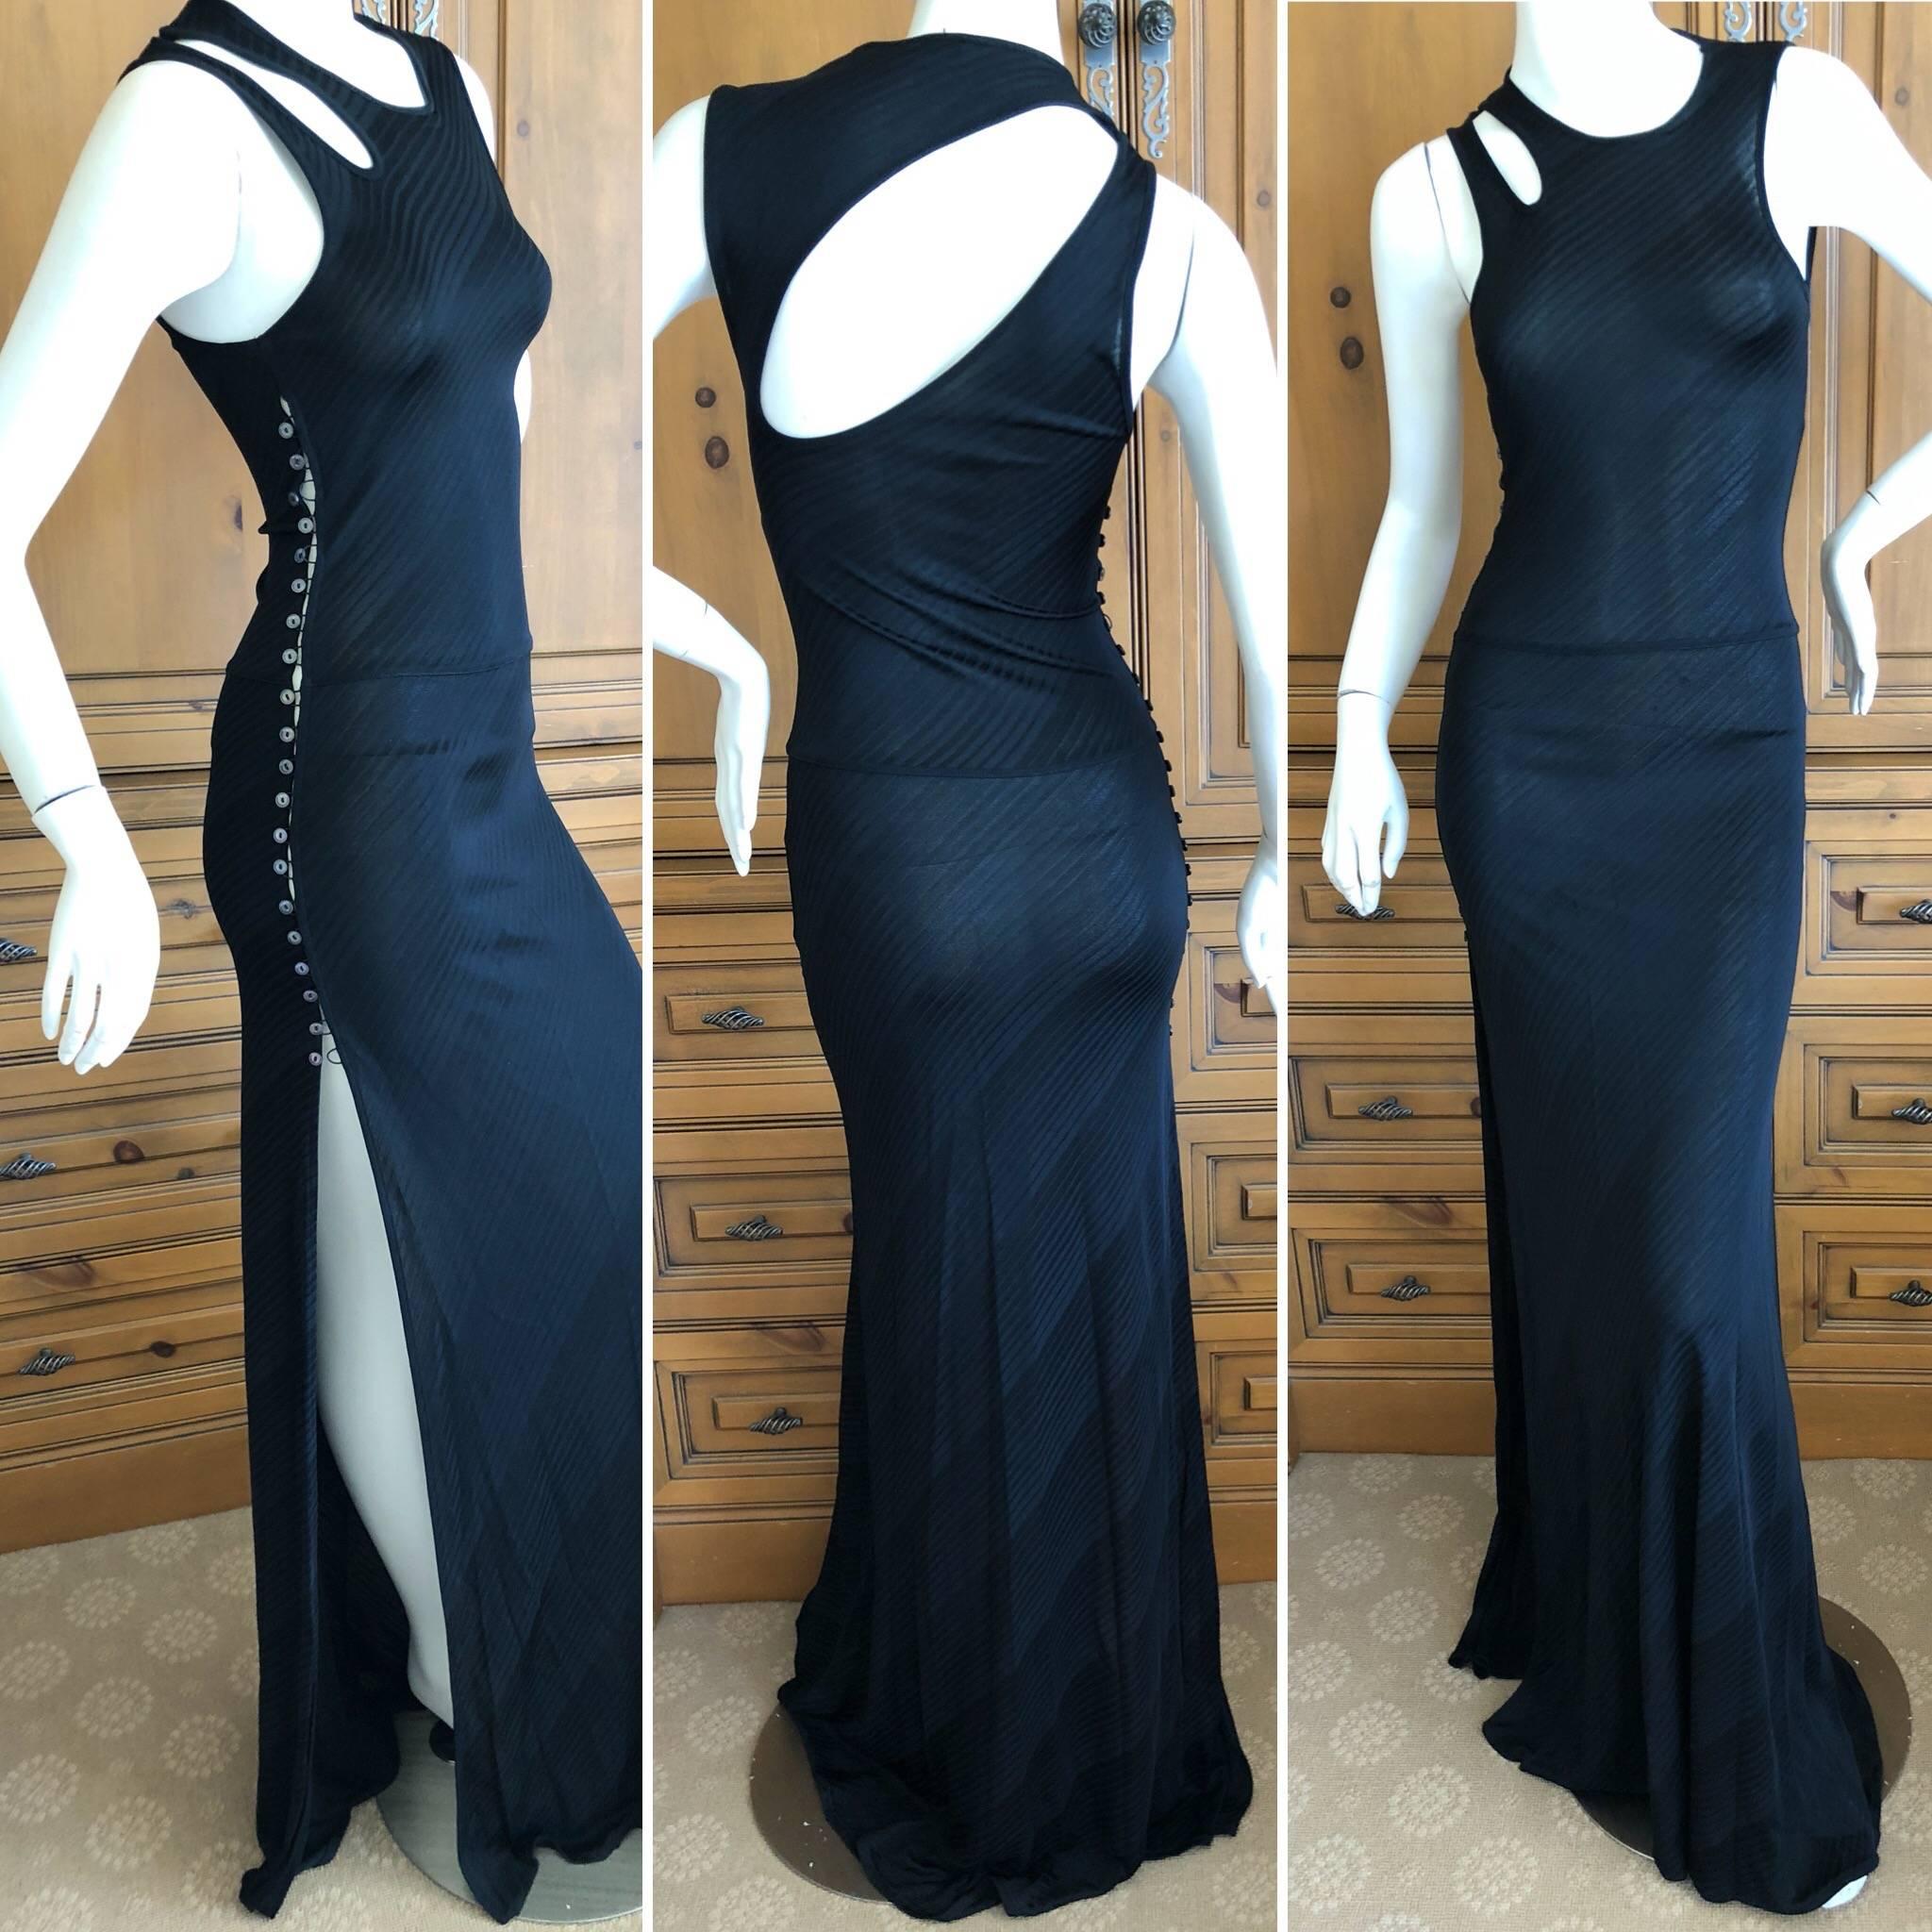 
Vintage Versus, Gianni Versace Sexy Sheer Side Slit Evening Dress with Cut Out Details
 Size Small, there is no size tag
Bust 36